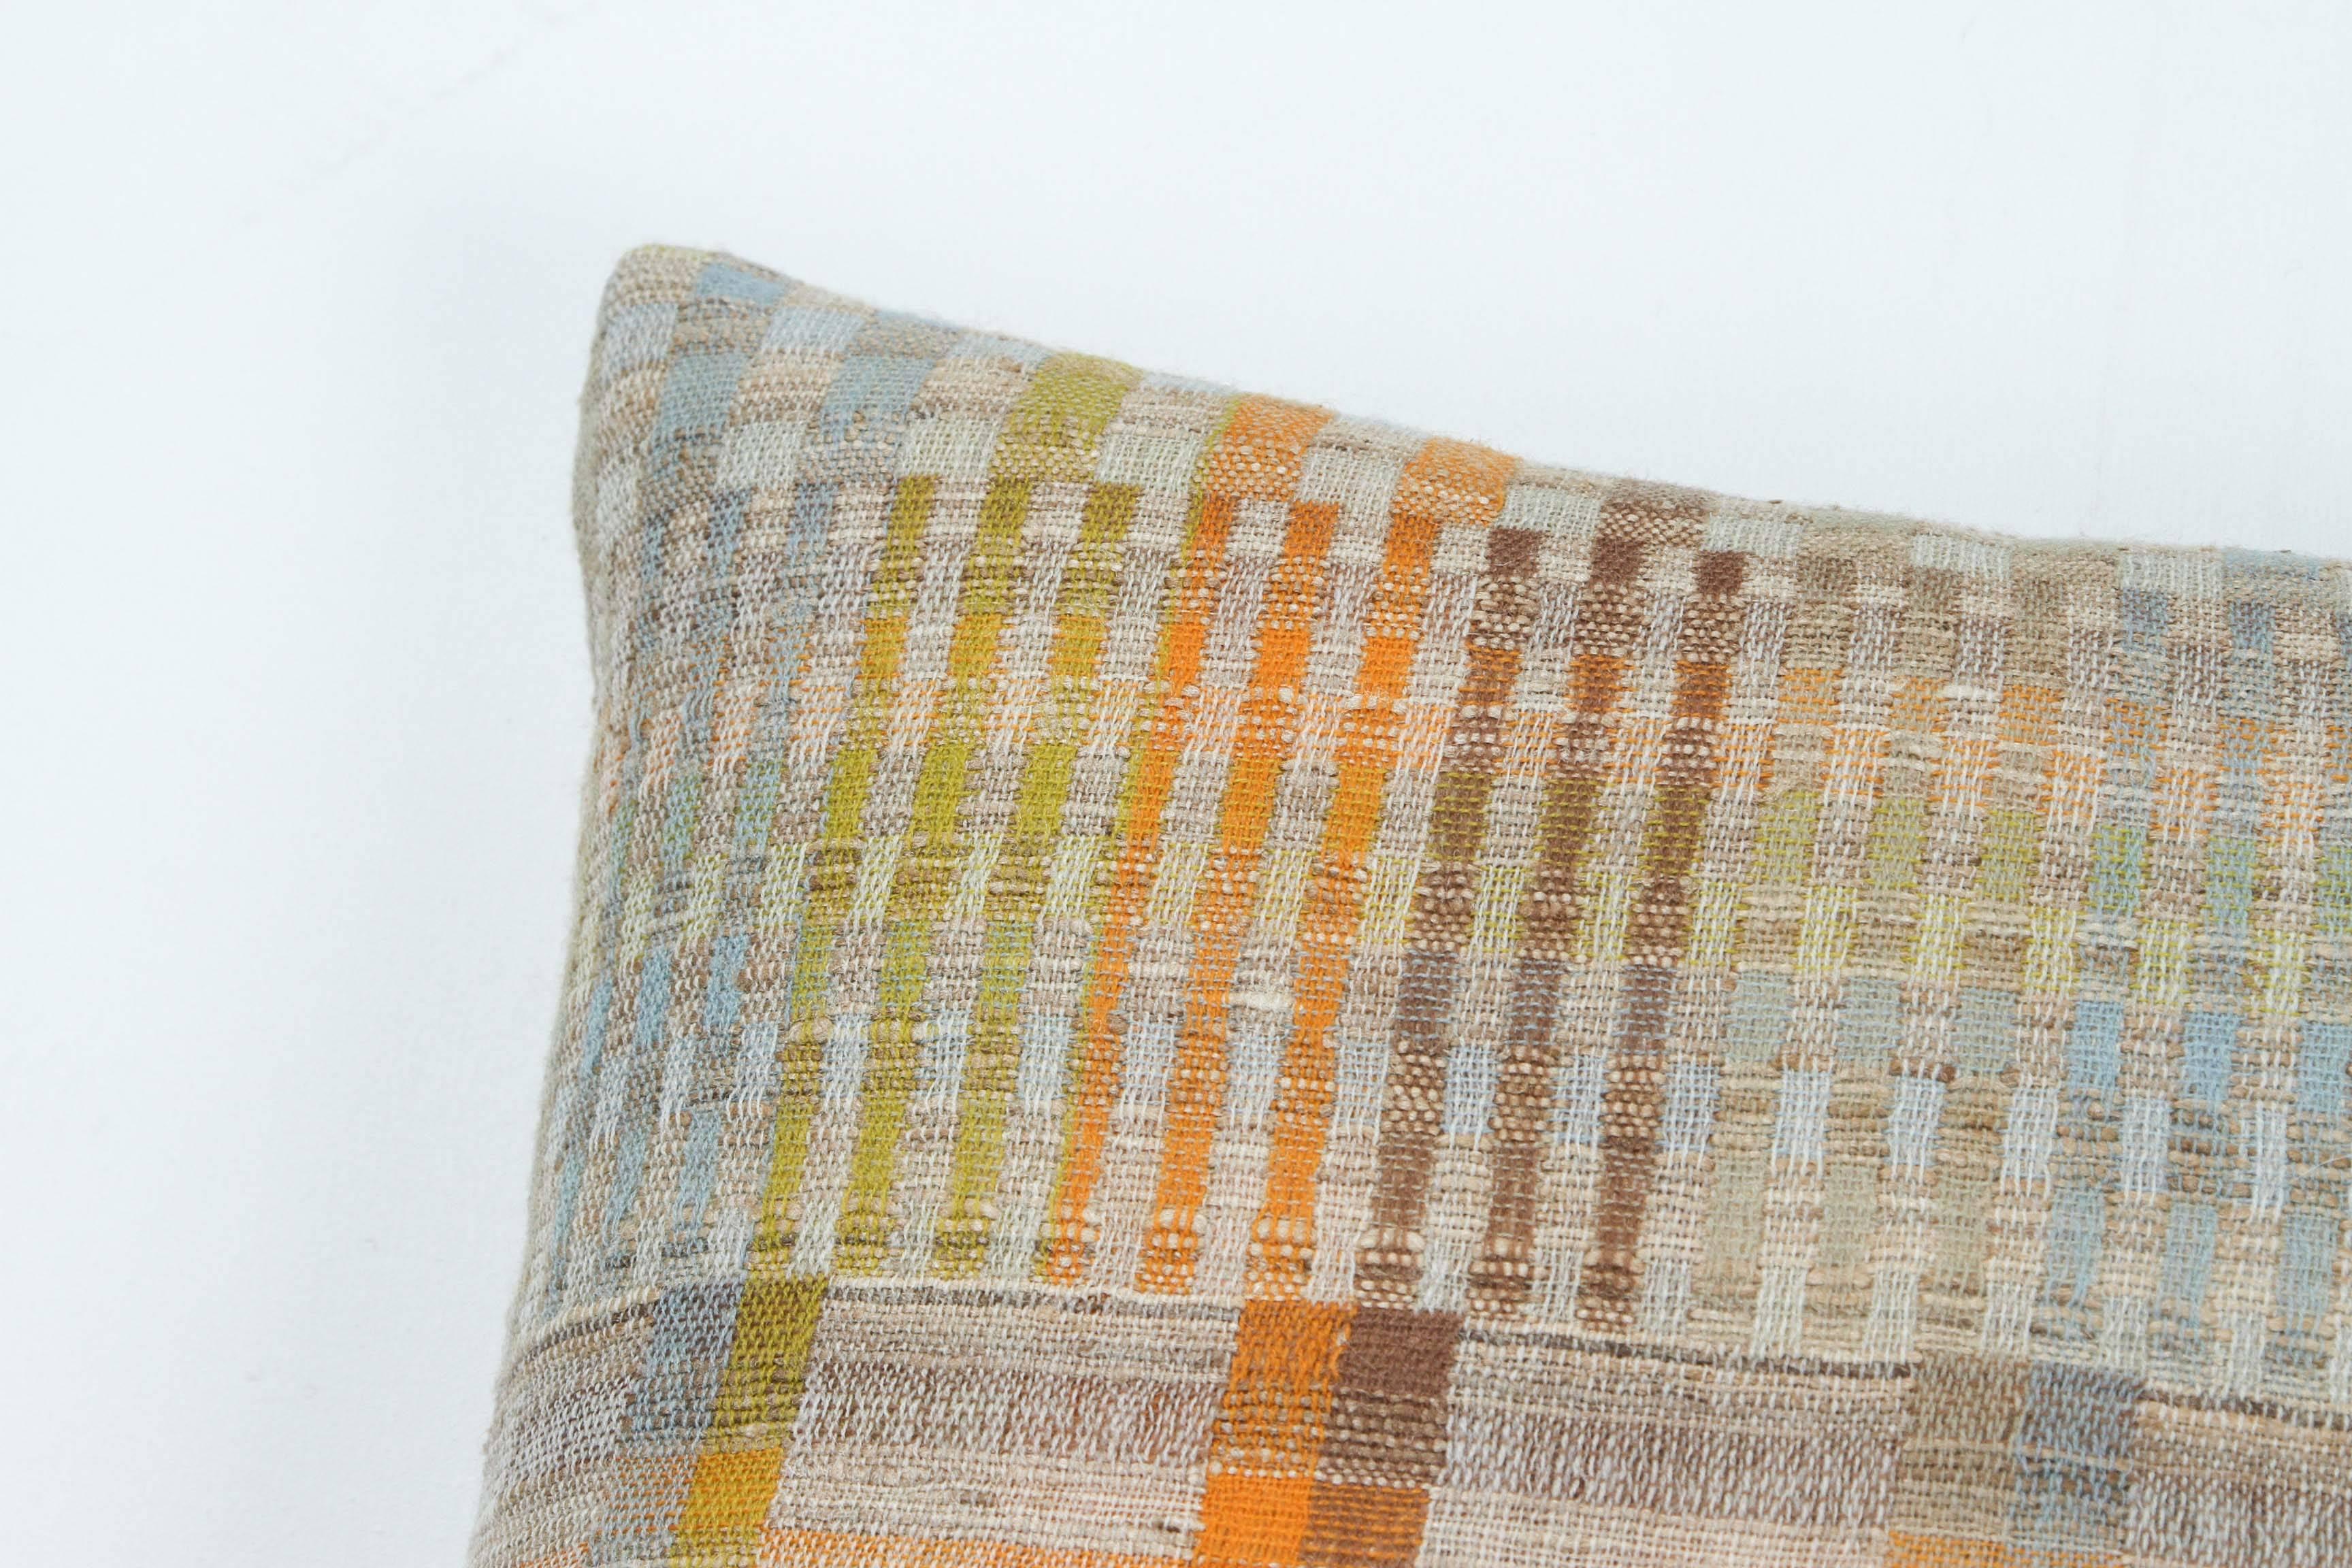 A contemporary line of cushions, pillows, throws, bedcovers, bedspreads and yardage handwoven in India on antique jacquard looms. Handspun wool, cotton, linen and raw silk give the textiles an appealing uneven quality.

This wool and raw tussar silk